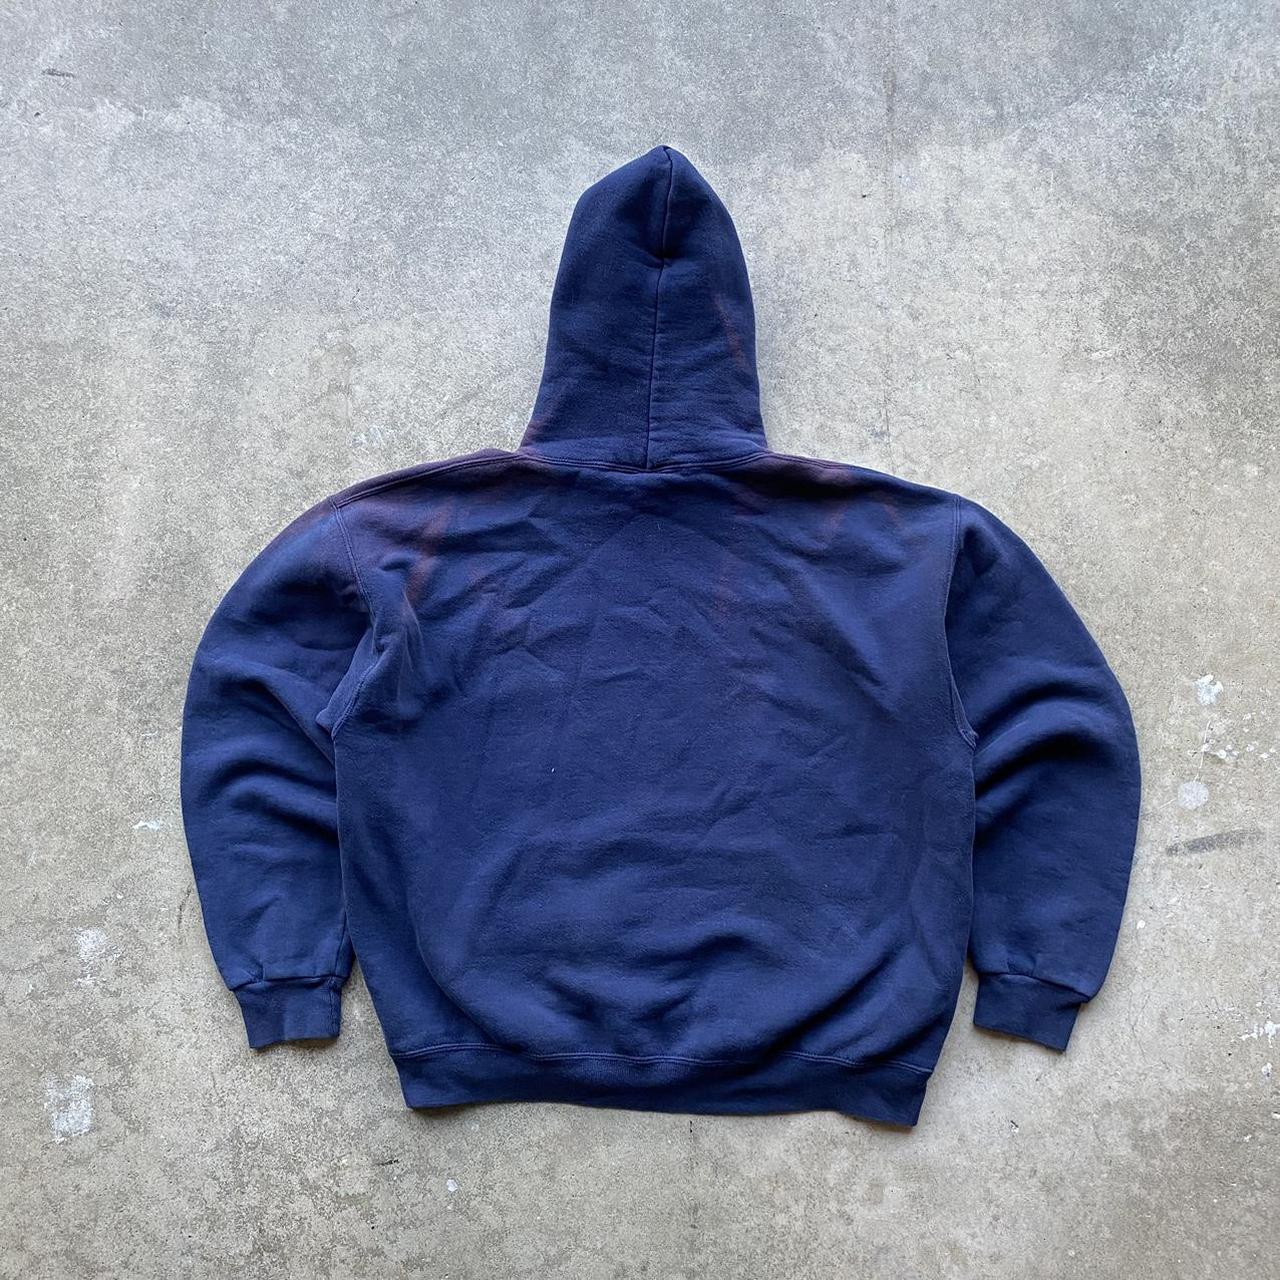 AKIMBO HOODIE - FADED PINK  Hoodies, Clothing brand, Clothes